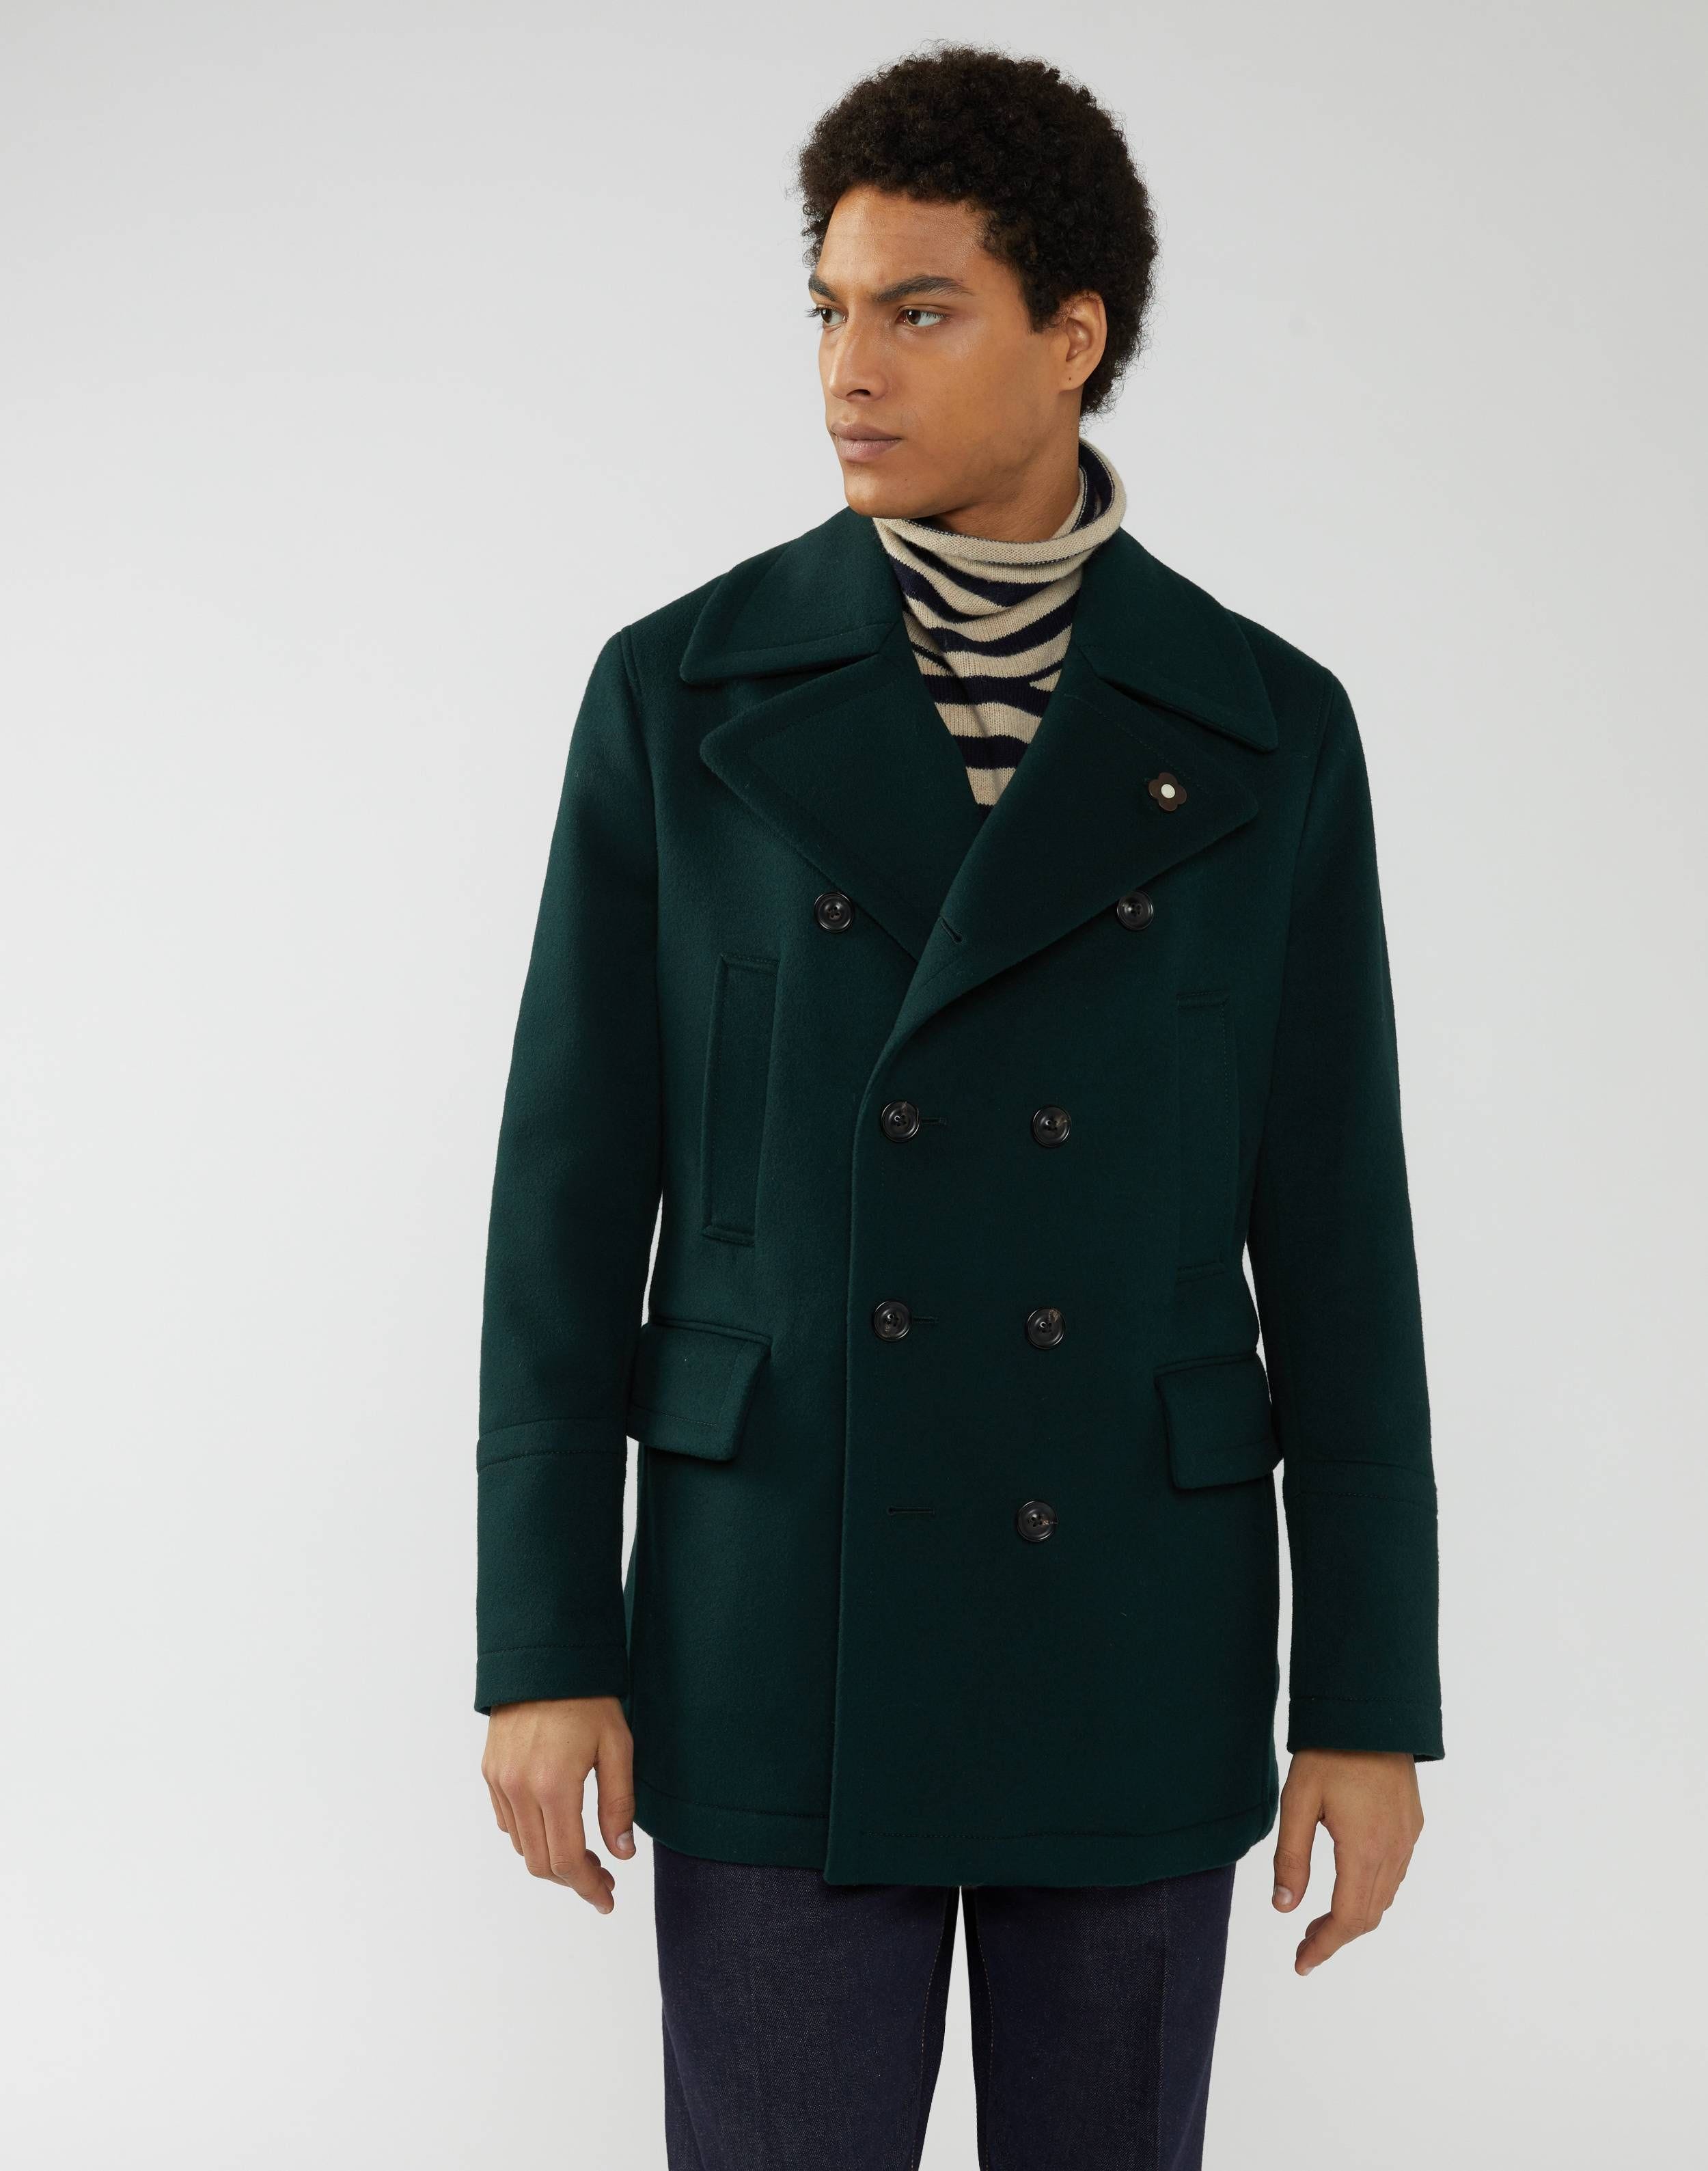 Short double-breasted peacoat in forest-green wool